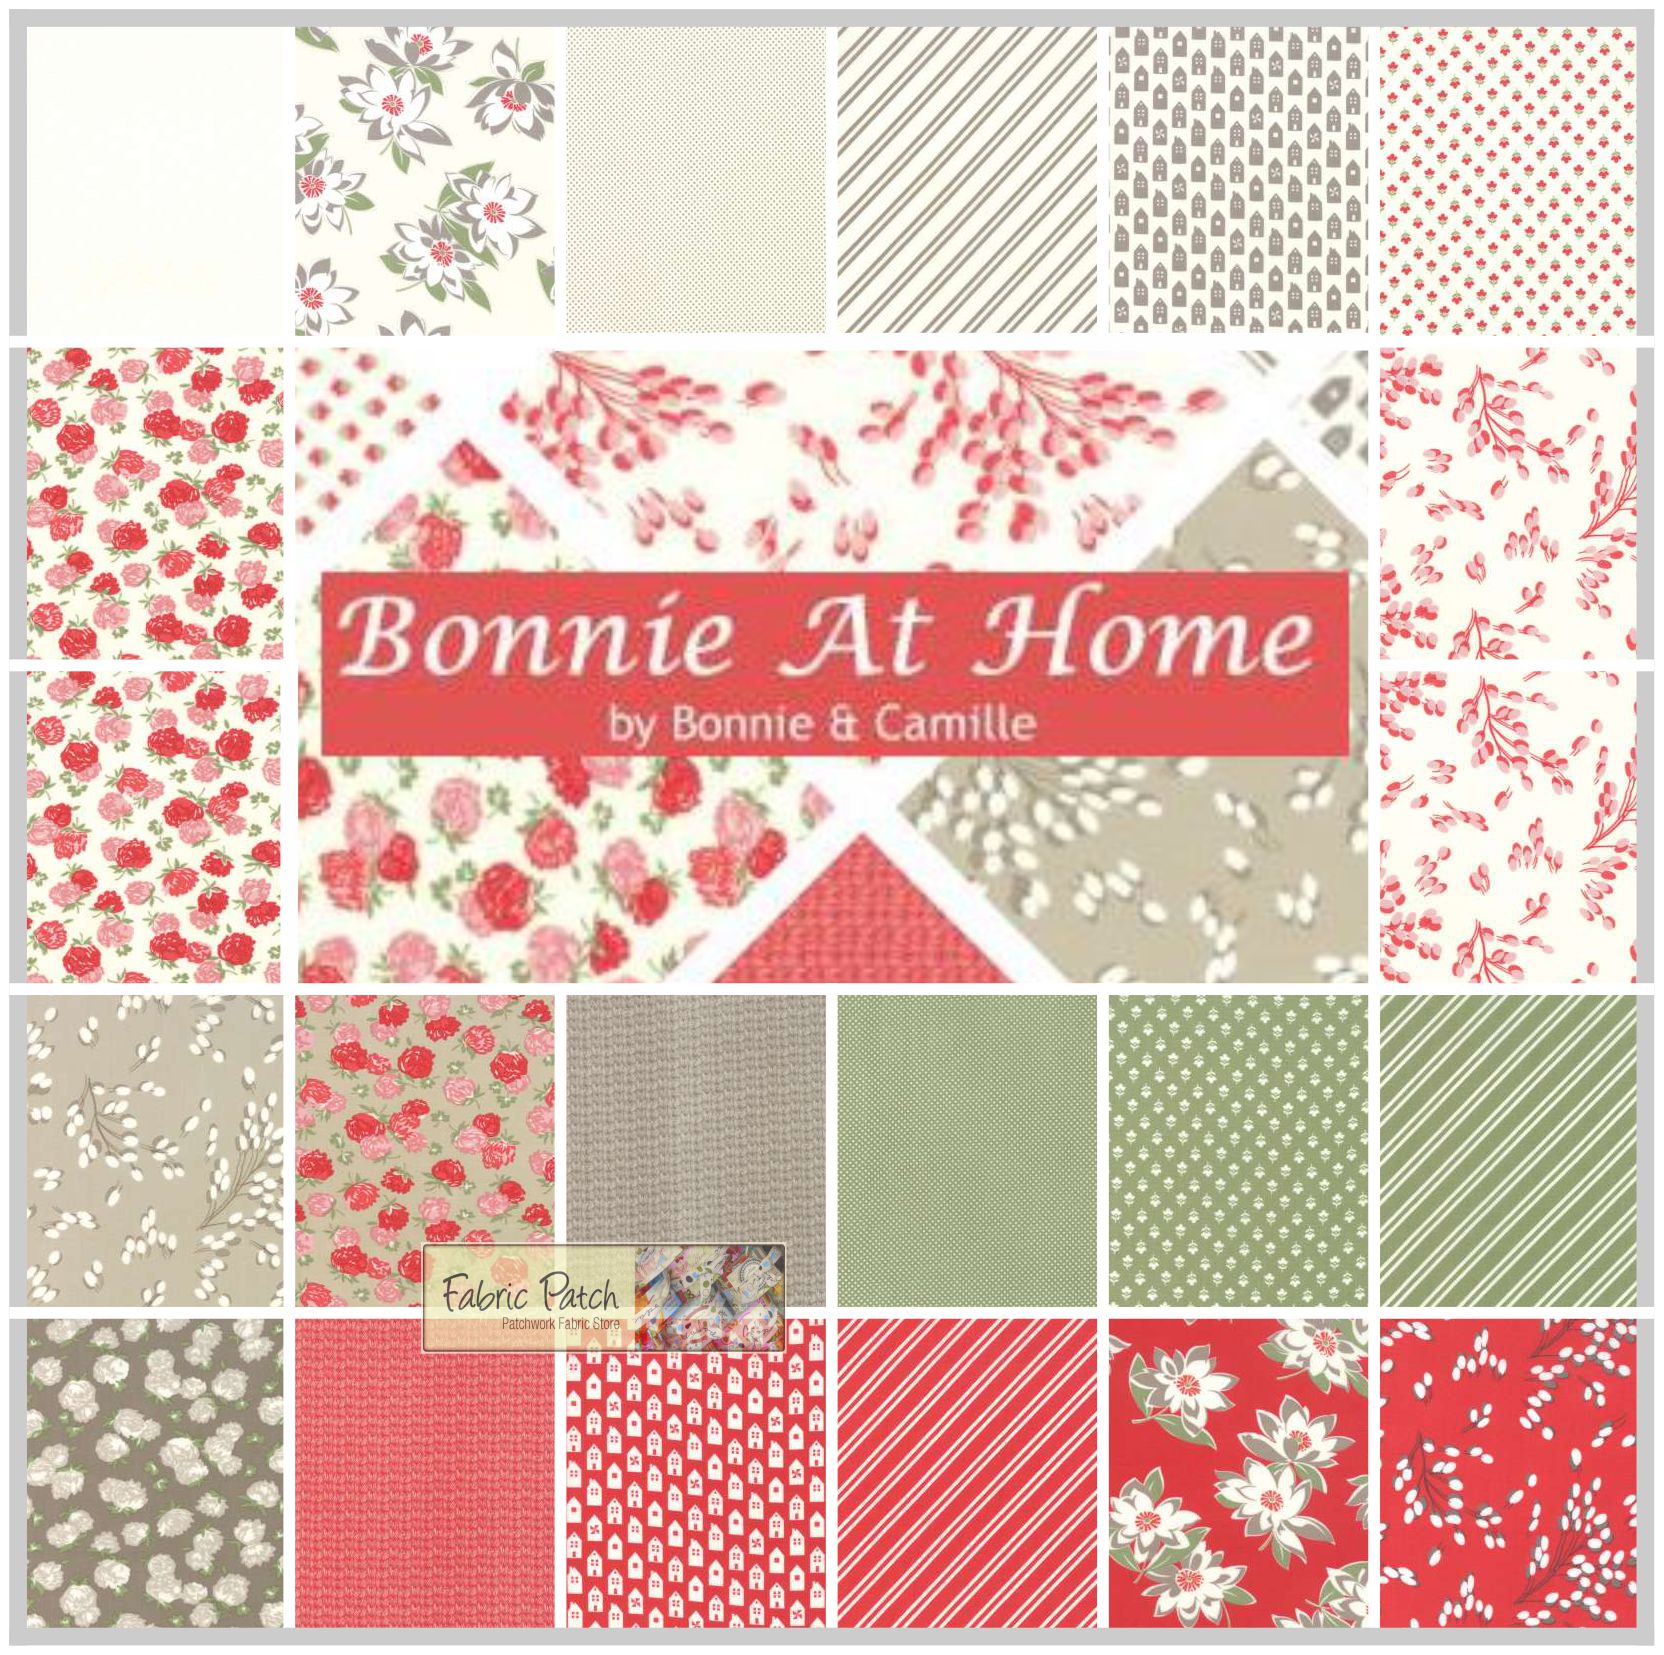 At Home Bonnie Fat 8th Bundle - Patchwork & Quilting Fabric - by Bonnie & Camille for Moda Fabrics